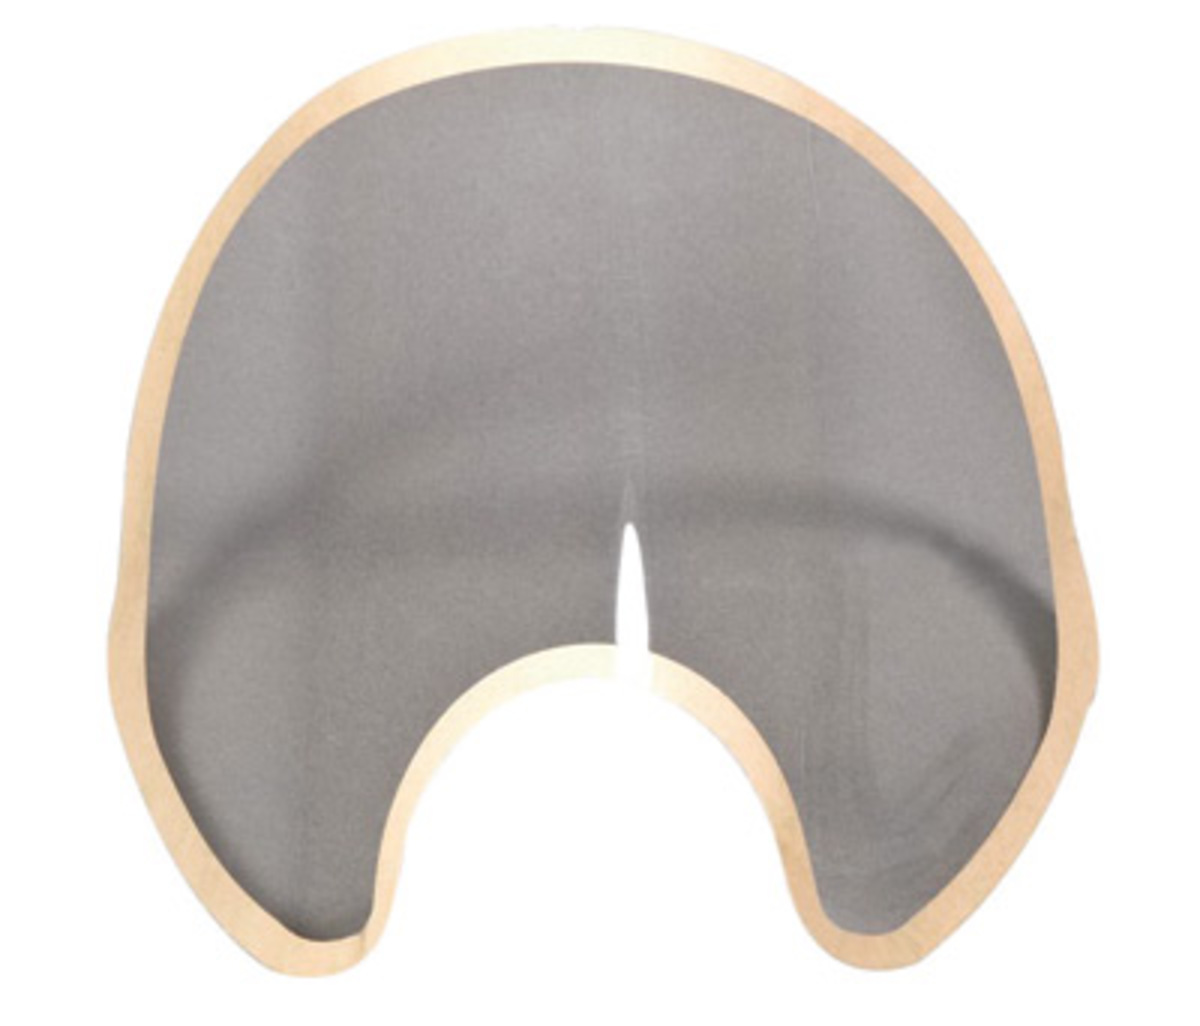 3M™ Semi-Permanent Lens Cover For 3M™ Ultimate FX Full Facepiece Reusable Respirator With Scotchgard™ Coating (Availability rest